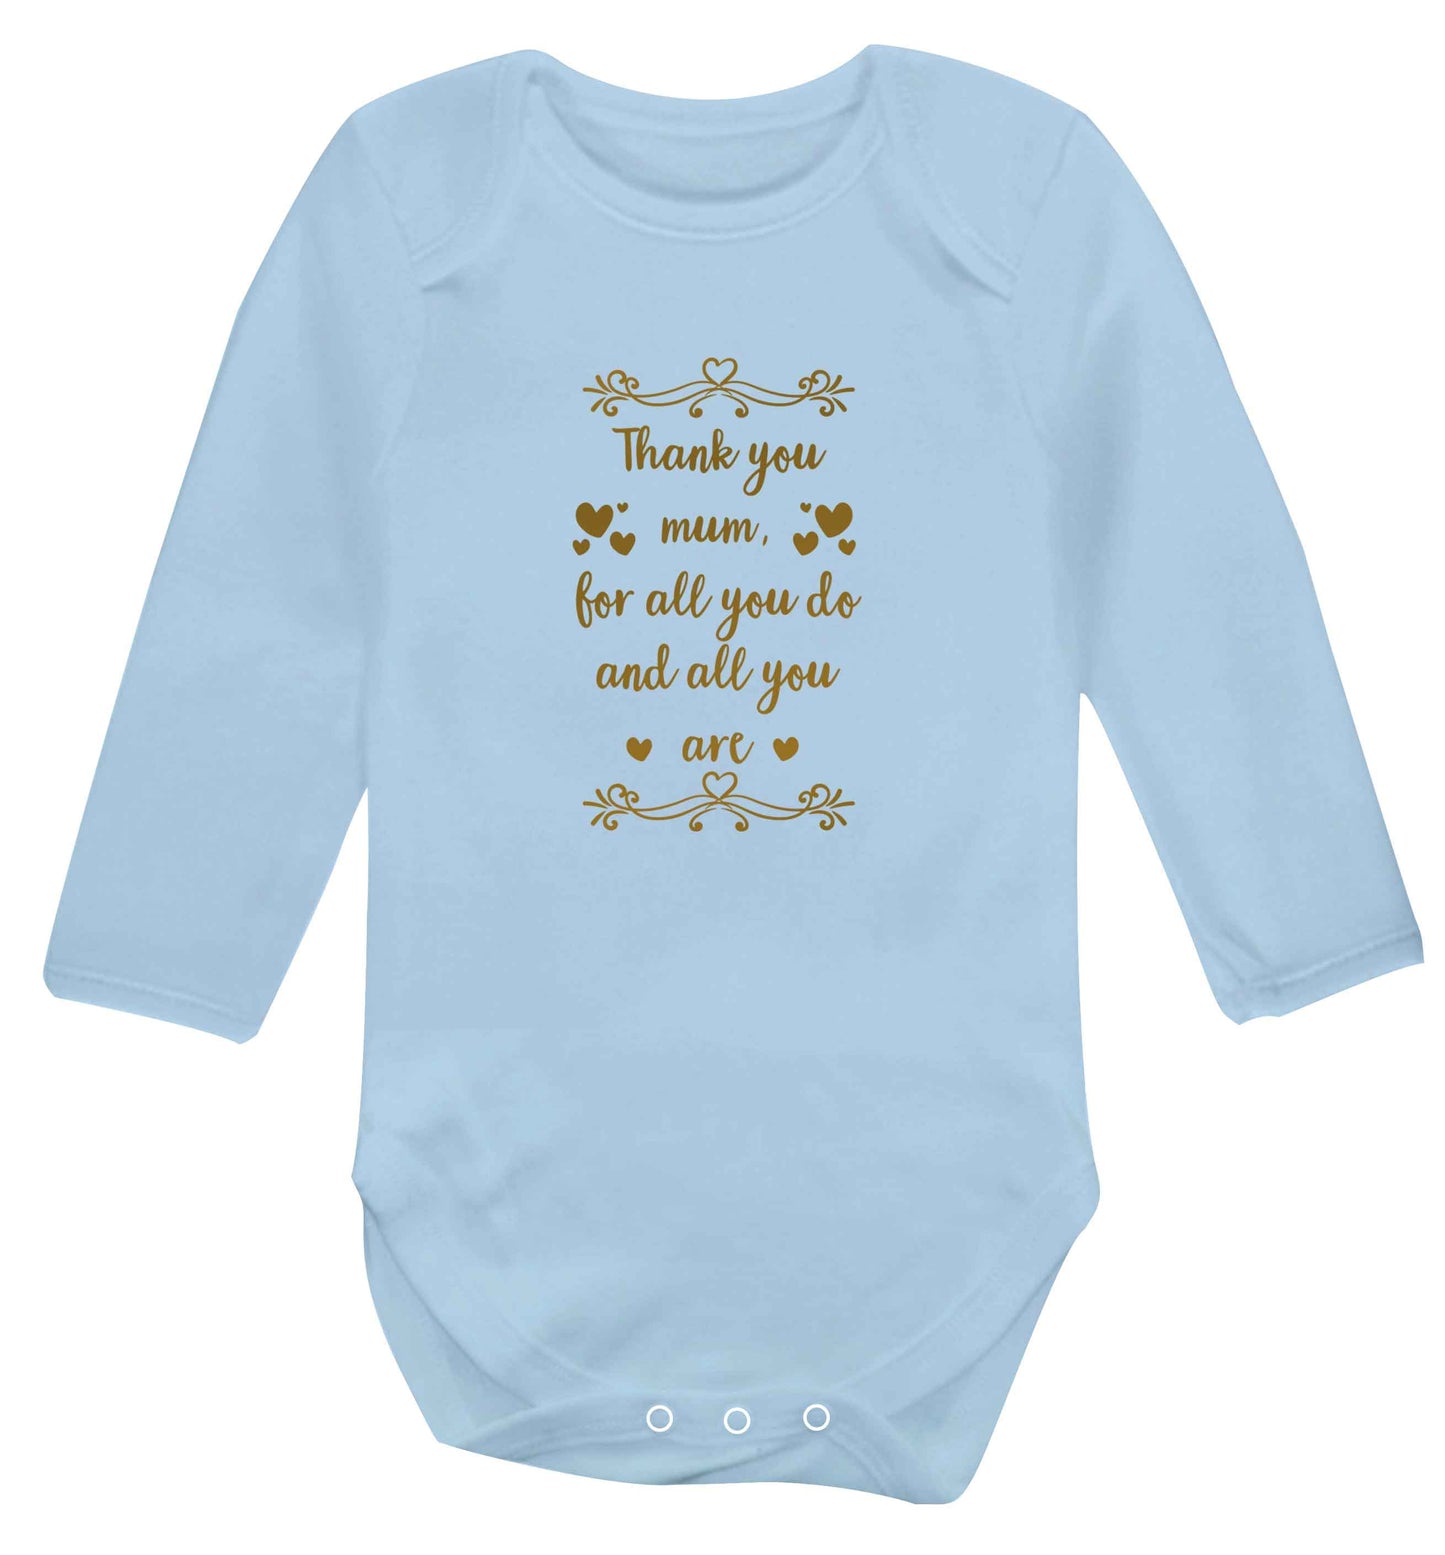 Gorgeous gifts for mums on mother's day! Thank you mum for all you do and all you are baby vest long sleeved pale blue 6-12 months